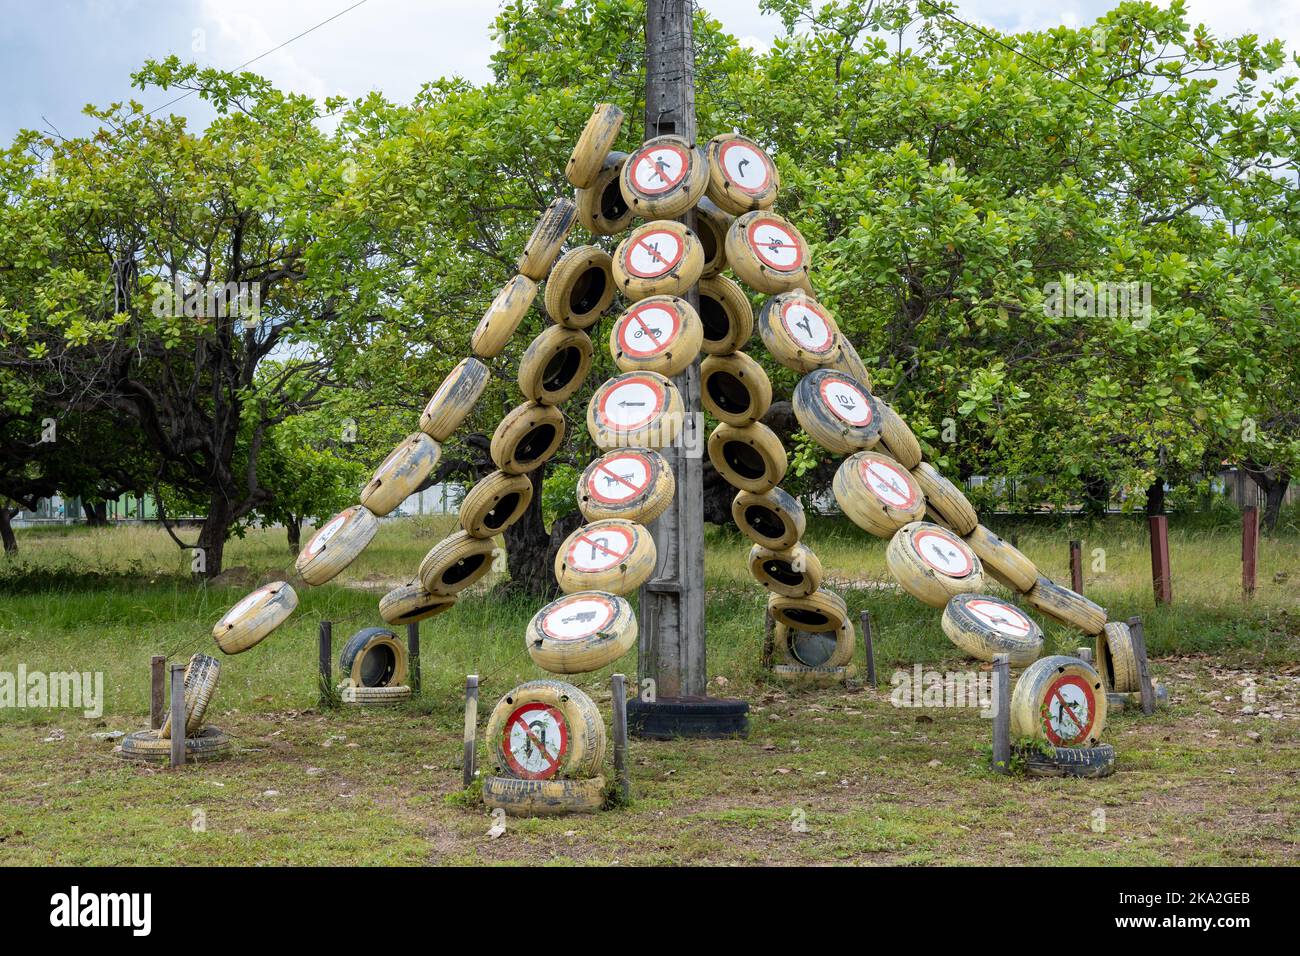 Used tires are recycled for a jungle gym in a park playground. Boa Vista, Roraima State, Brazil. Stock Photo